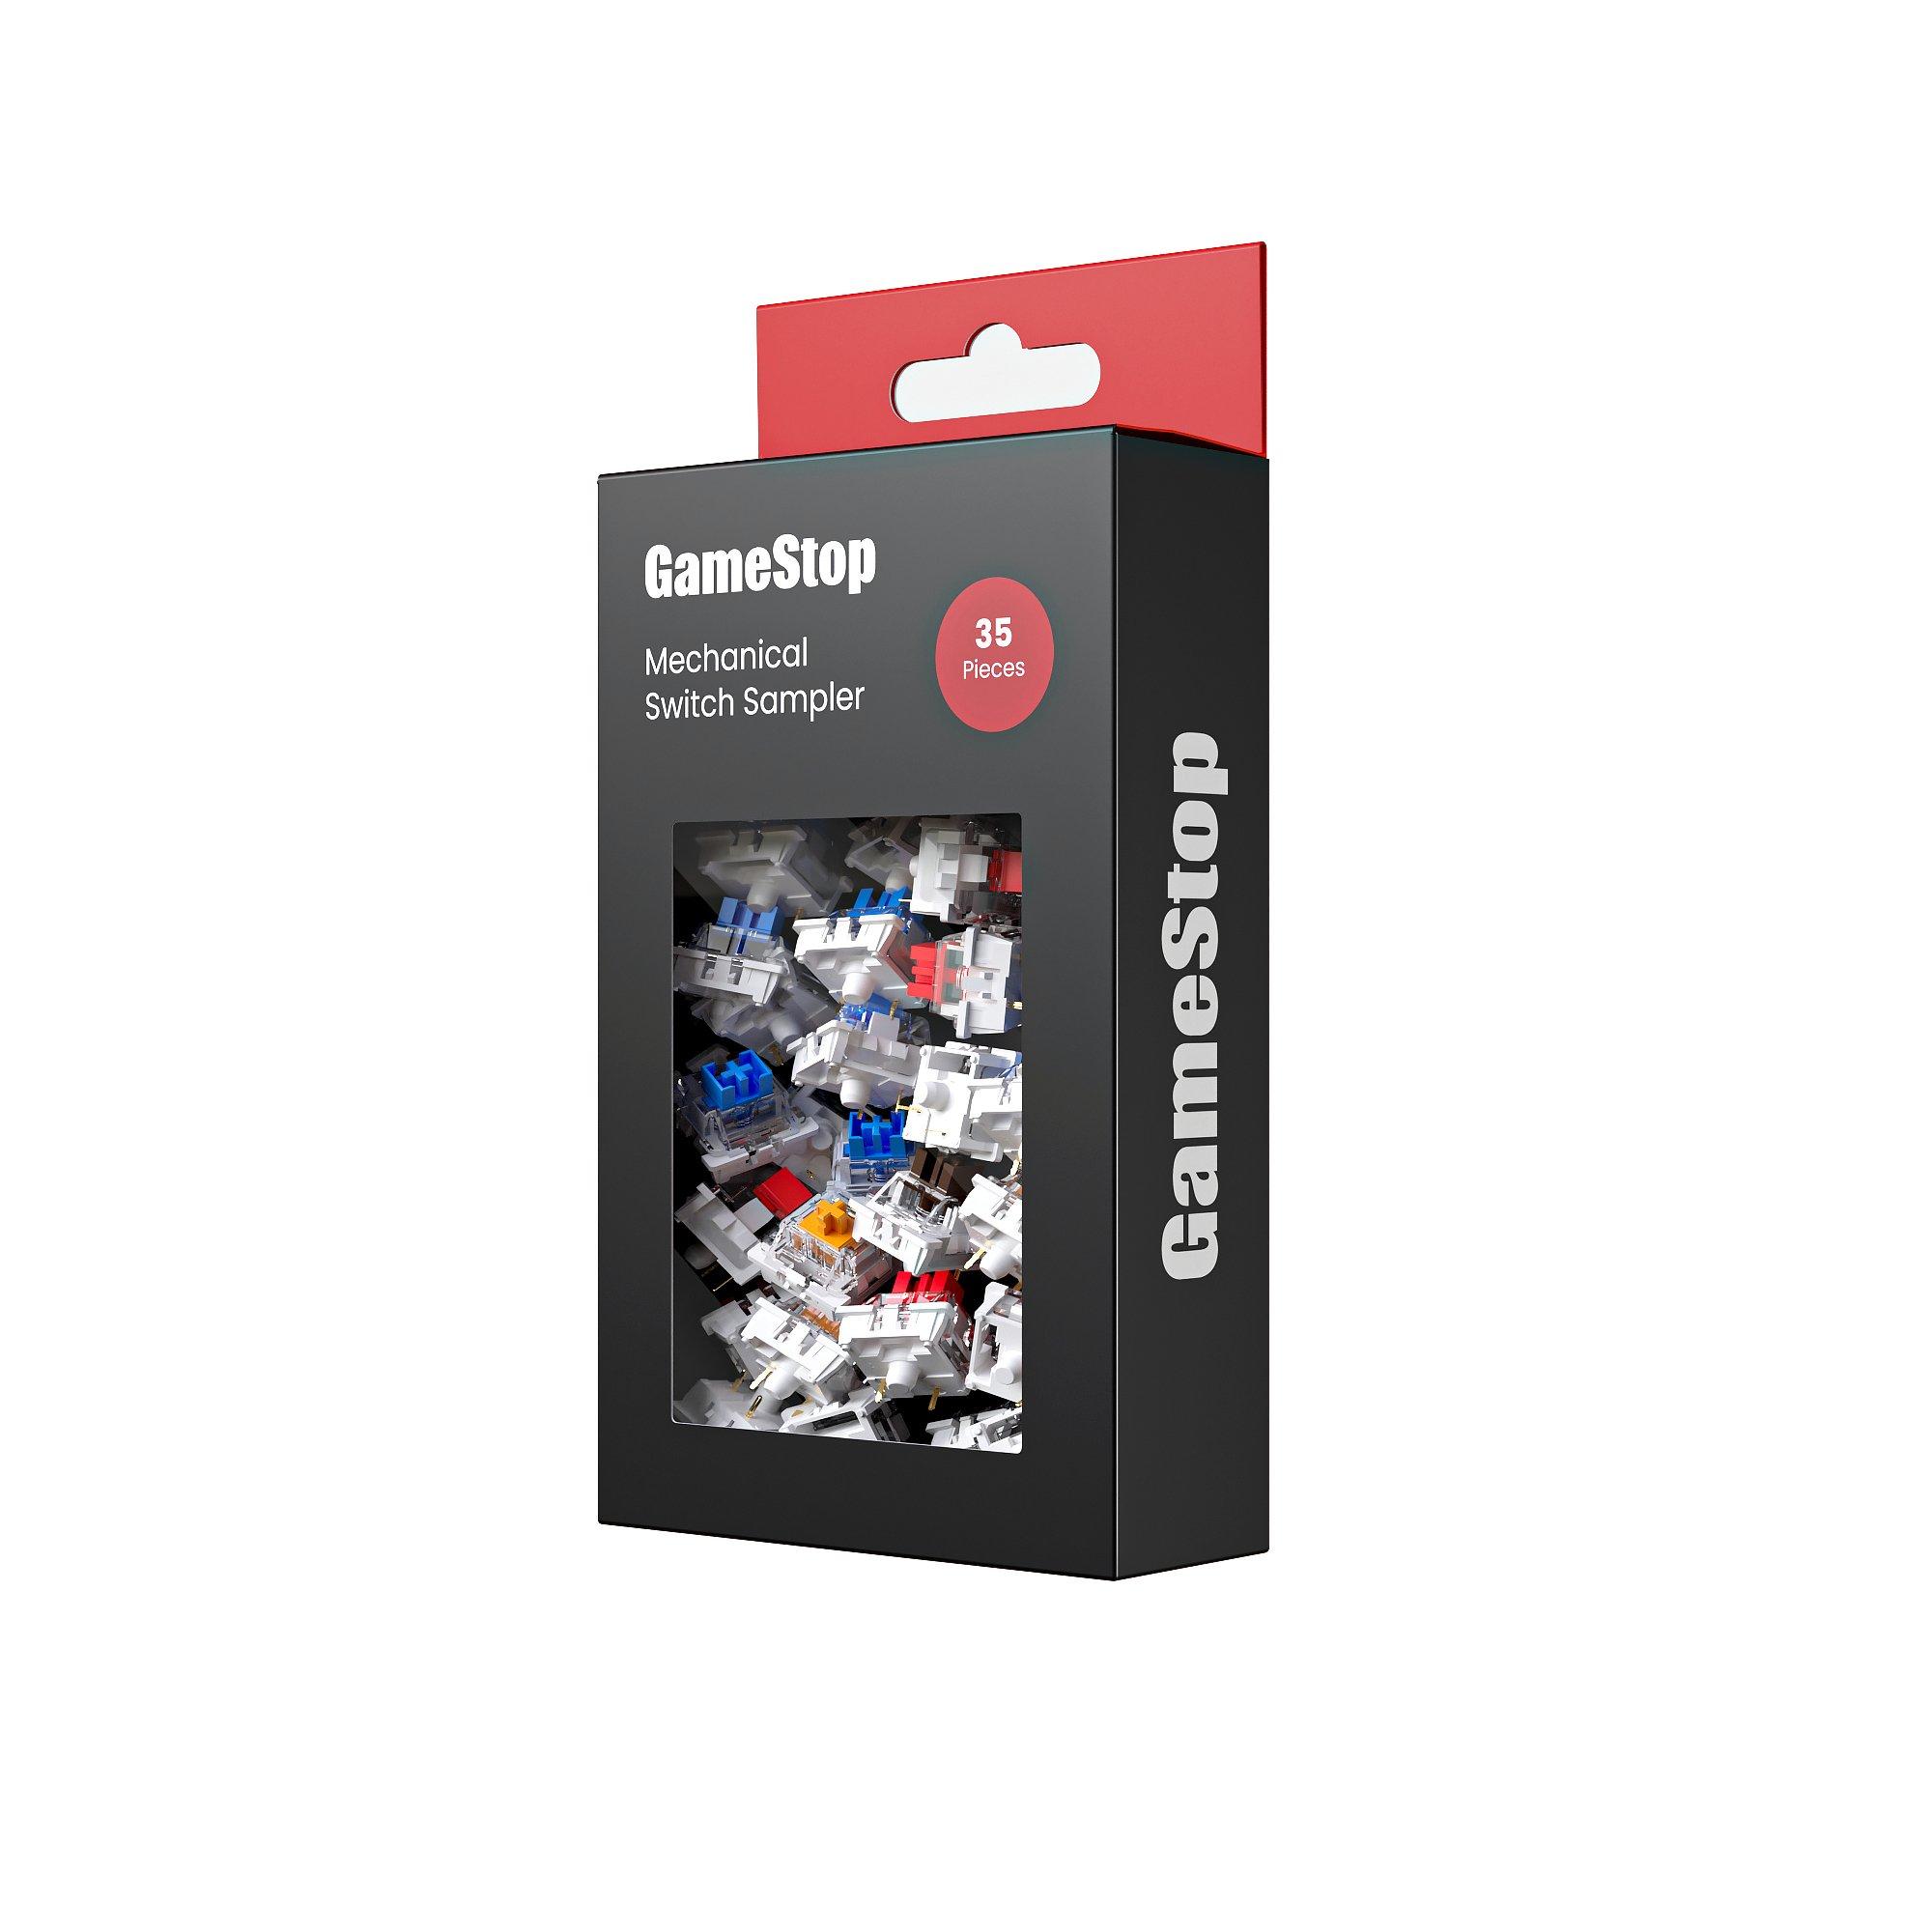 GameStop Switch Sampler for Hot-Swappable Keyboards - 35 Pieces